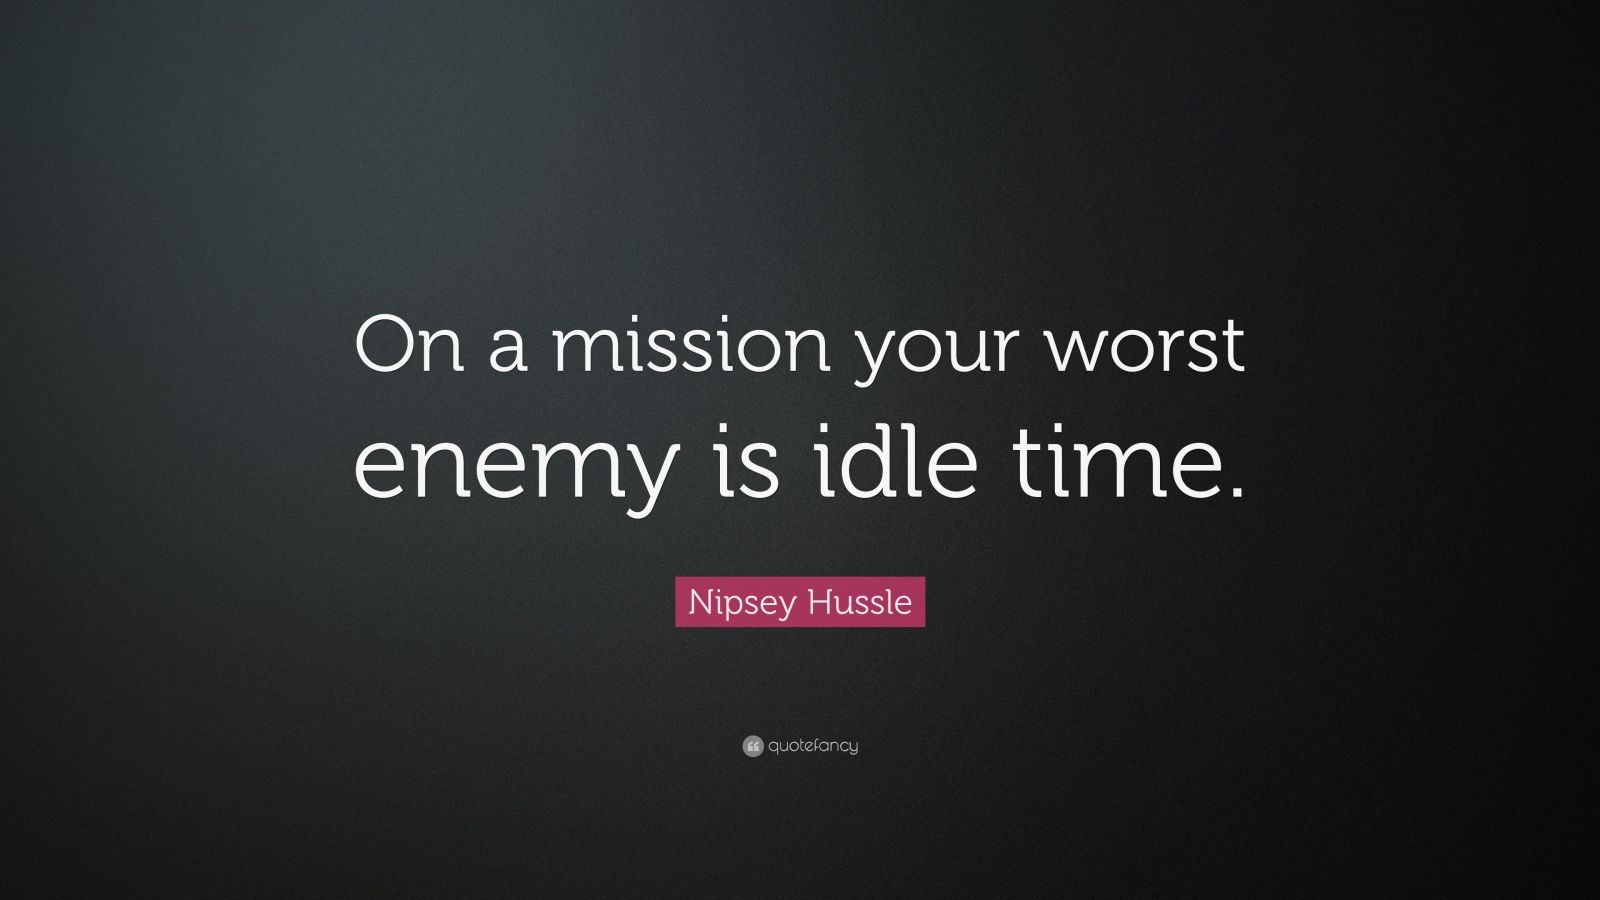 2108458 Nipsey Hussle Quote On a mission your worst enemy is idle time